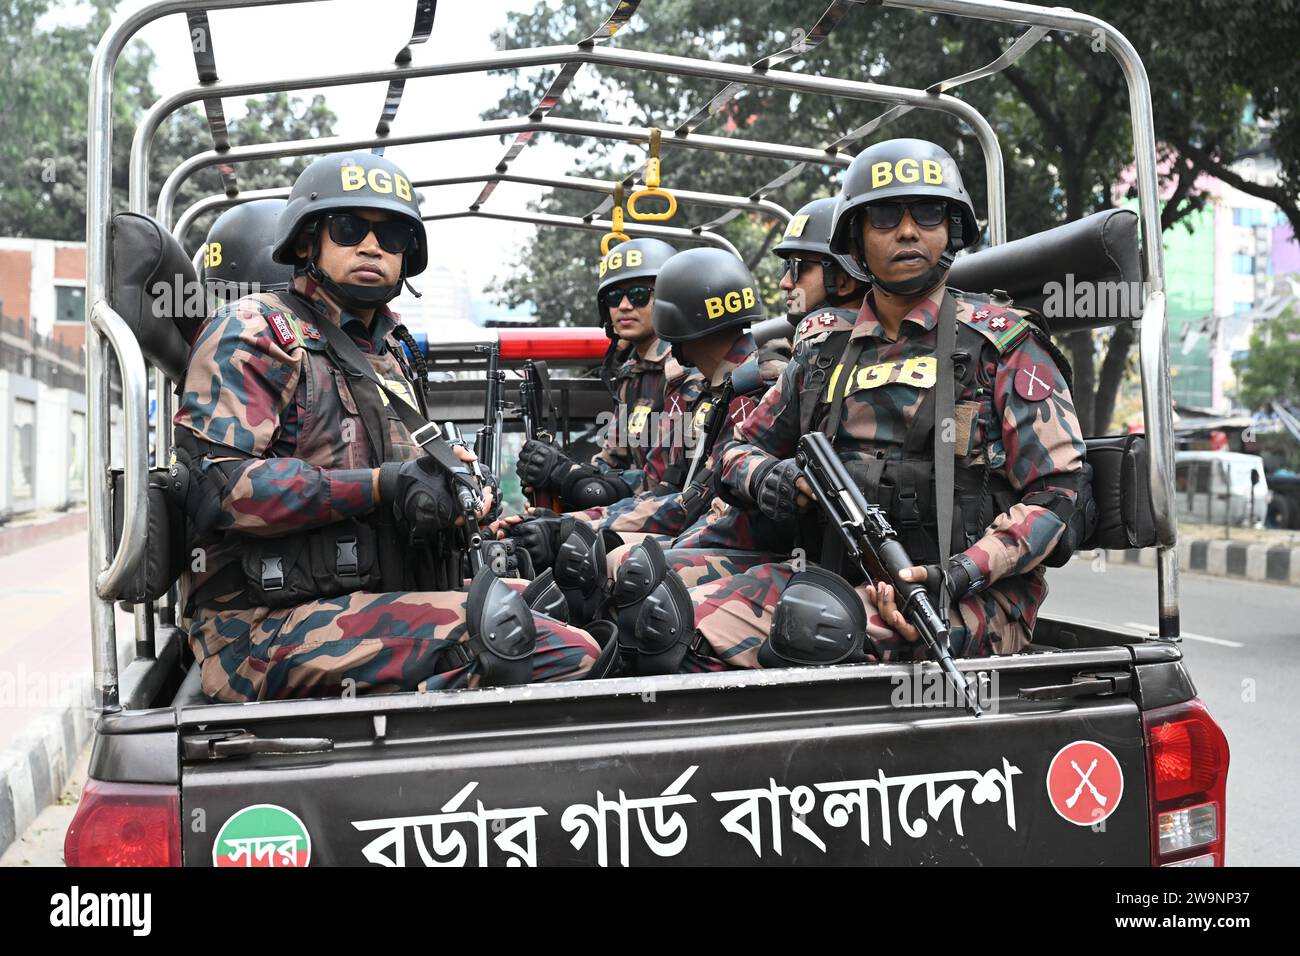 Members of Border Guard Bangladesh (BGB) stand guard in a street for the upcoming 12th general election in Dhaka, Bangladesh on December 29, 2023. Election security duties have started to help ensure a peaceful atmosphere and maintain law and order across the country for the 7 January polls. According to the Bangladesh Election Commission, the 12th general election is scheduled on 7 January 2024 to select members of the national parliament in Bangladesh. Stock Photo